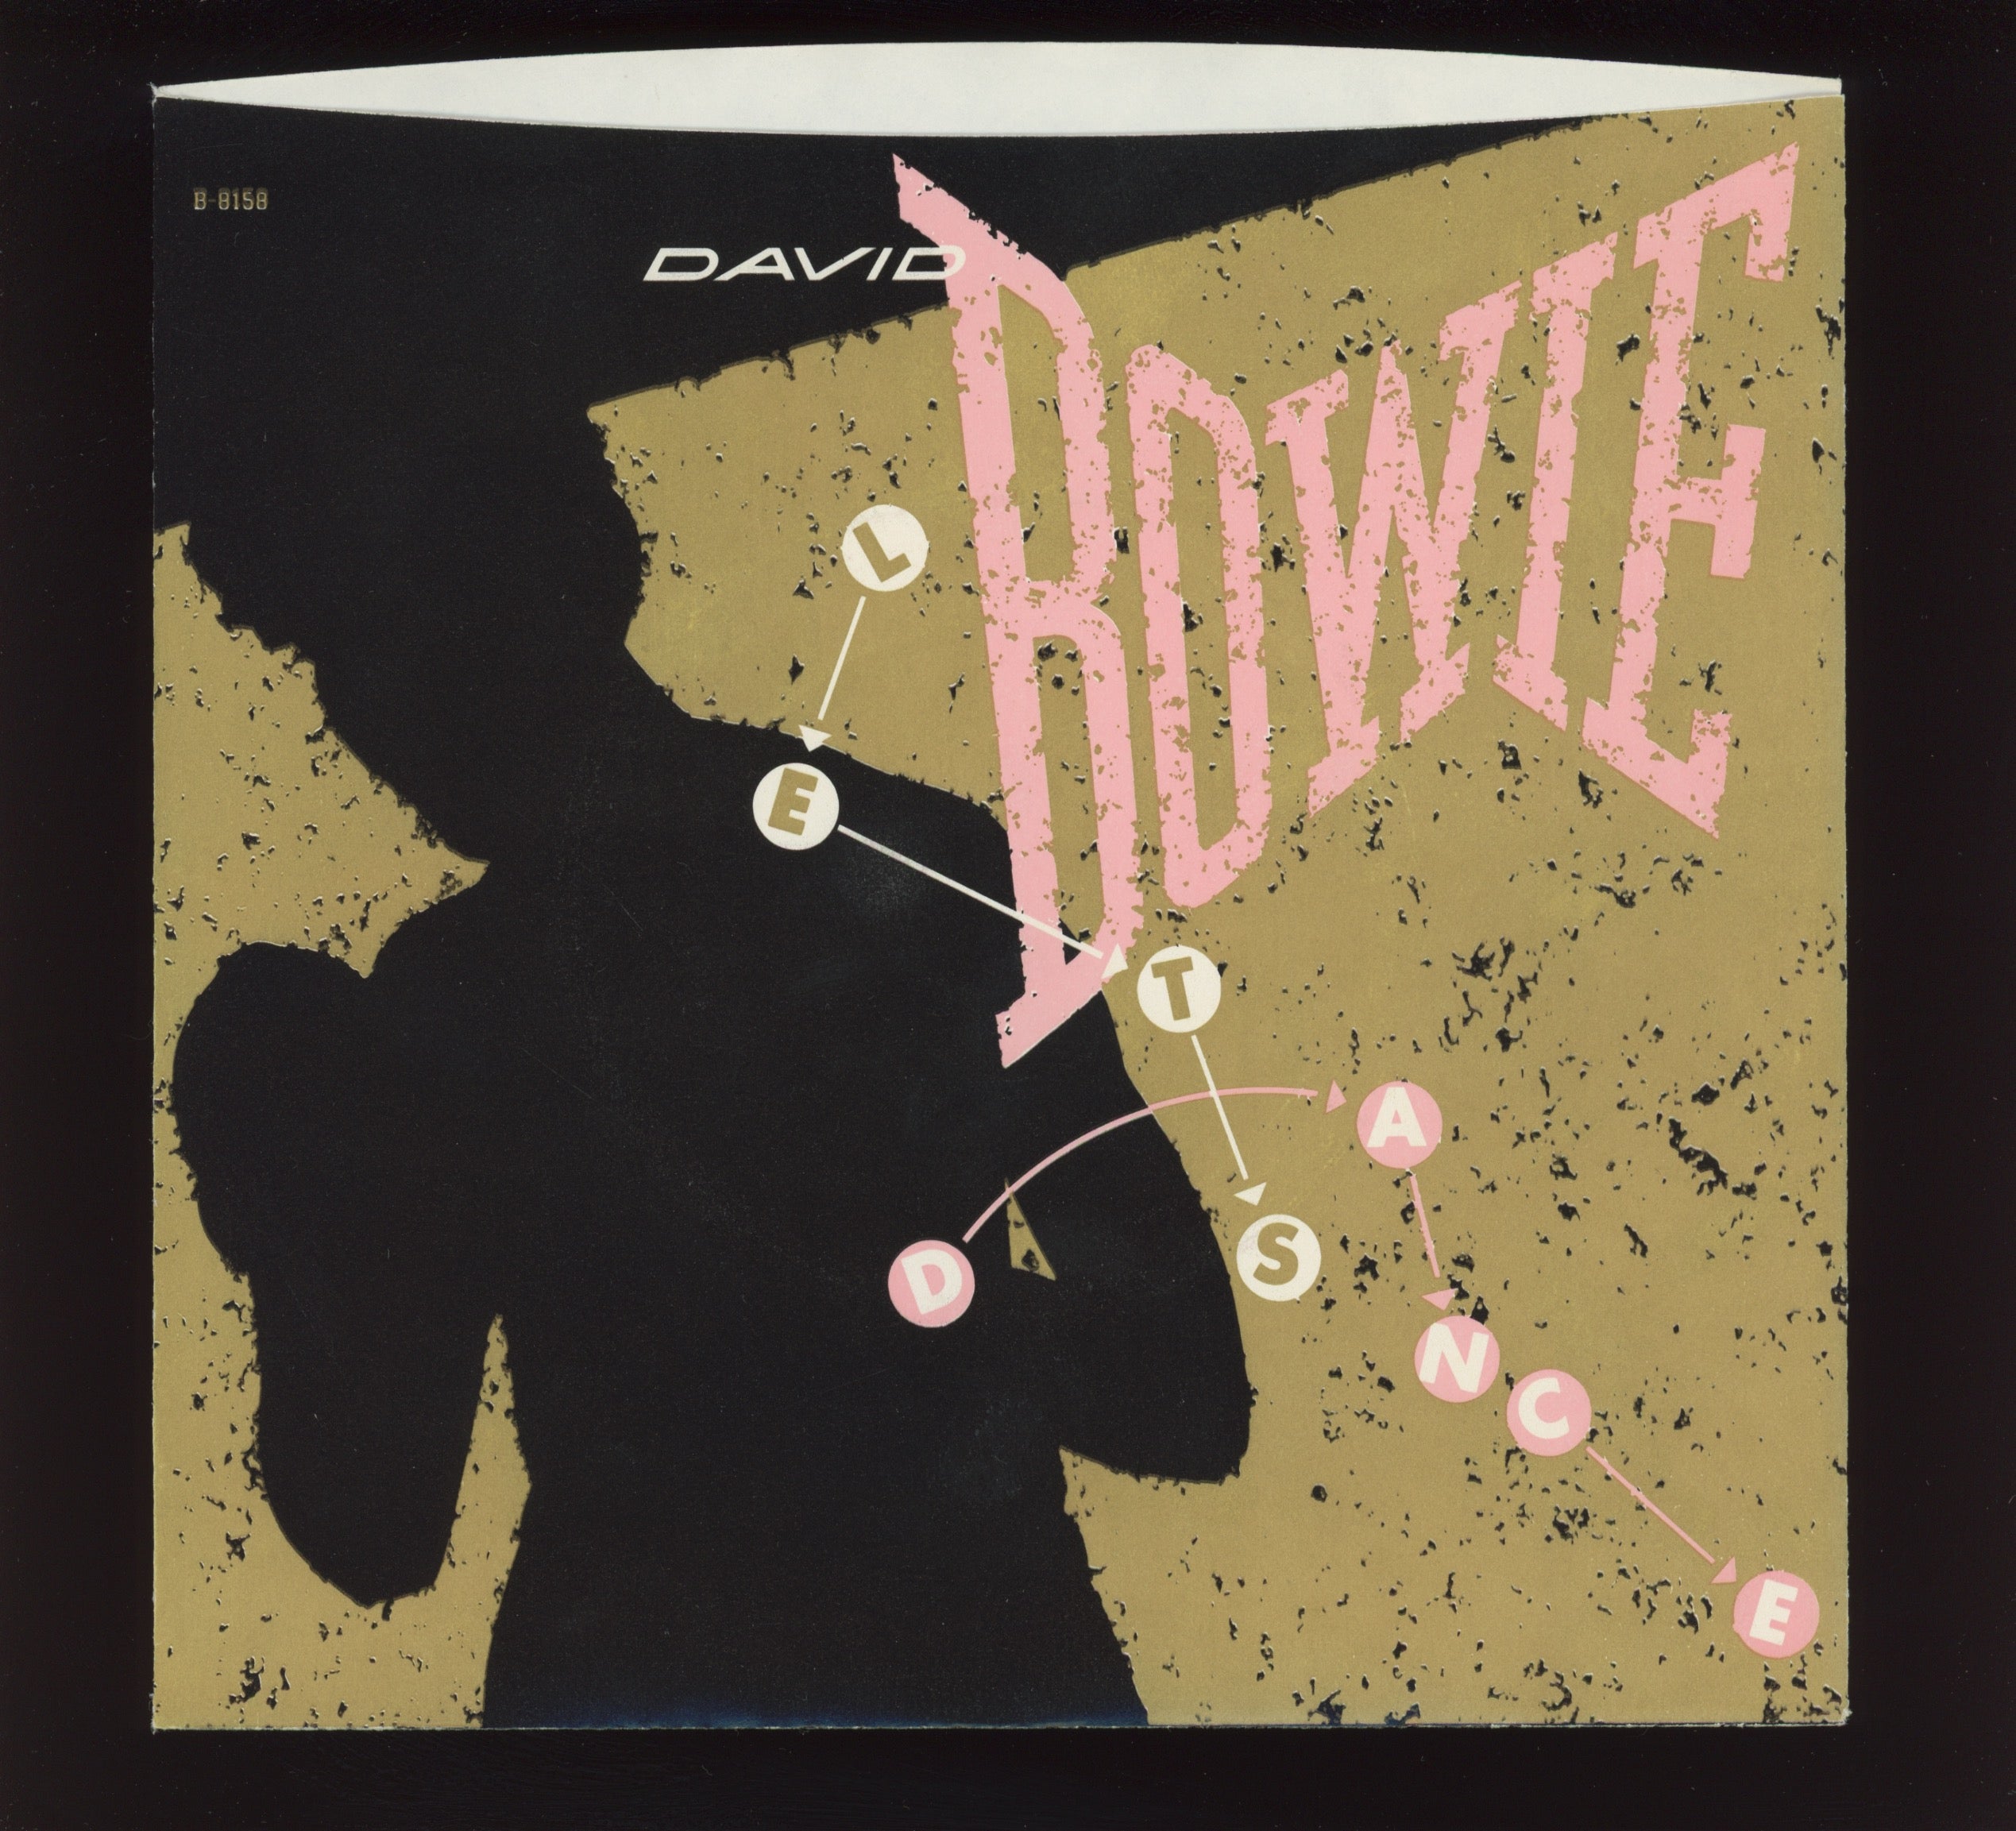 David Bowie - Let's Dance on EMI America With Picture Sleeve